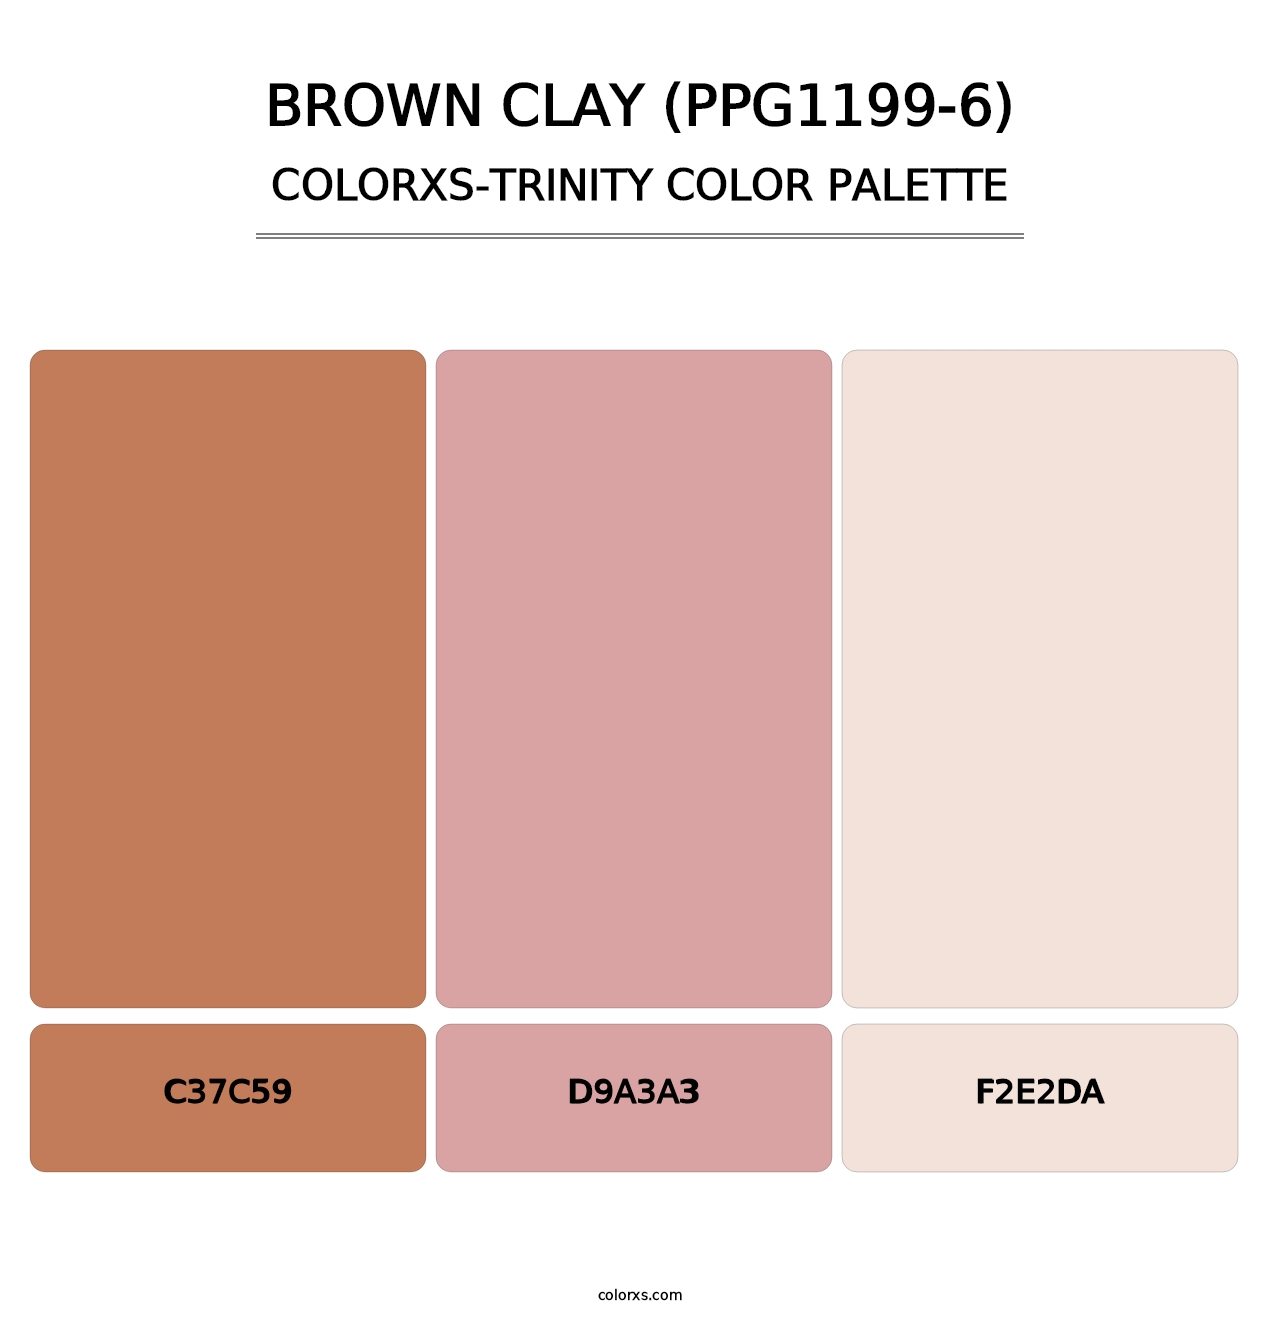 Brown Clay (PPG1199-6) - Colorxs Trinity Palette